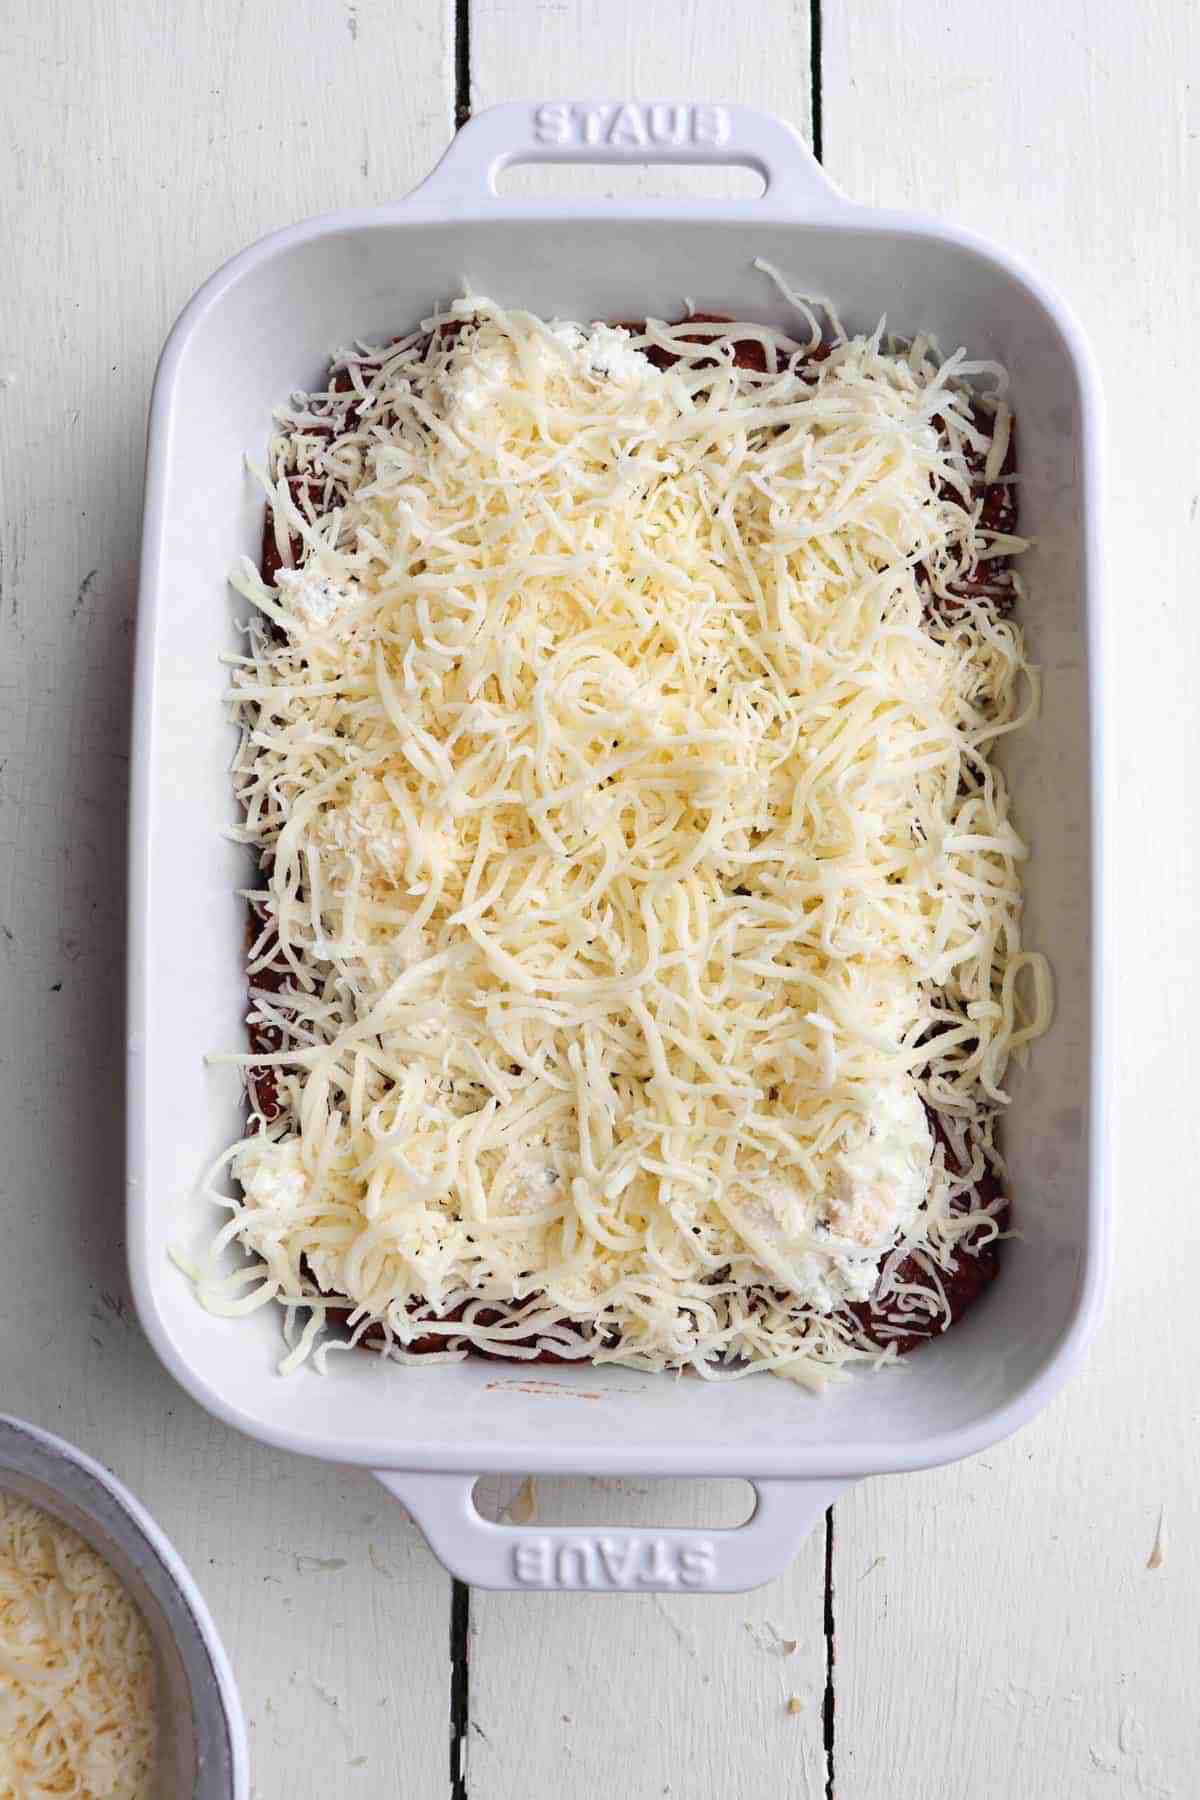 shredded cheese layer